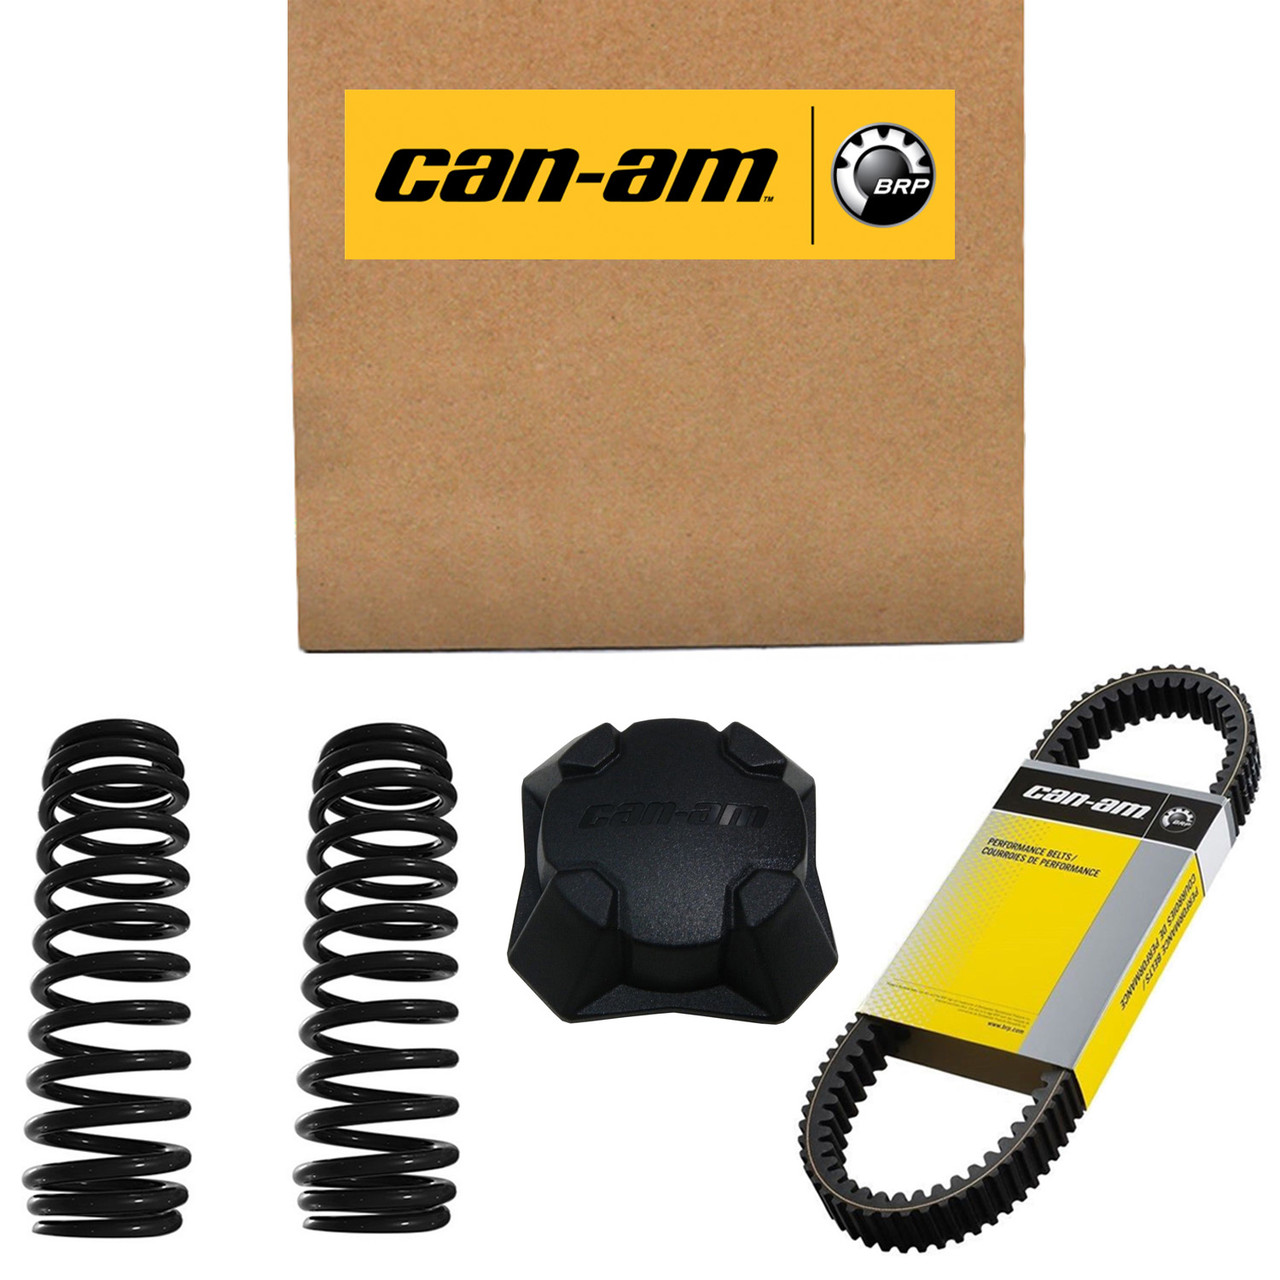 Can-Am New OEM Rh Lower Arm Ass Y, S50220RCA000